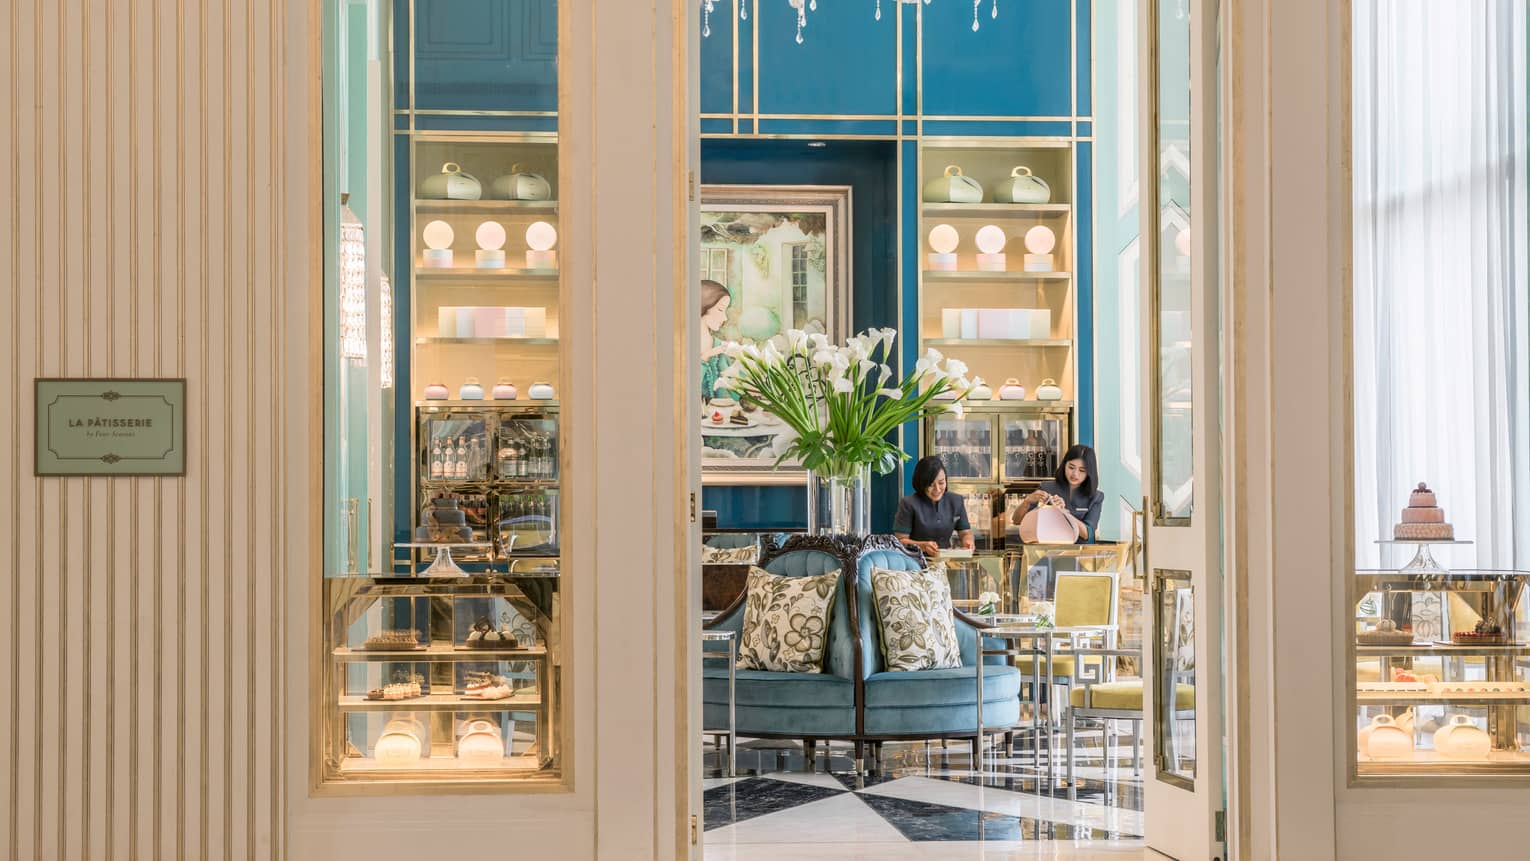 View inside La Patisserie doors with elegant blue and gold chairs, tall glass vase with white flowers, woman fastening pink box